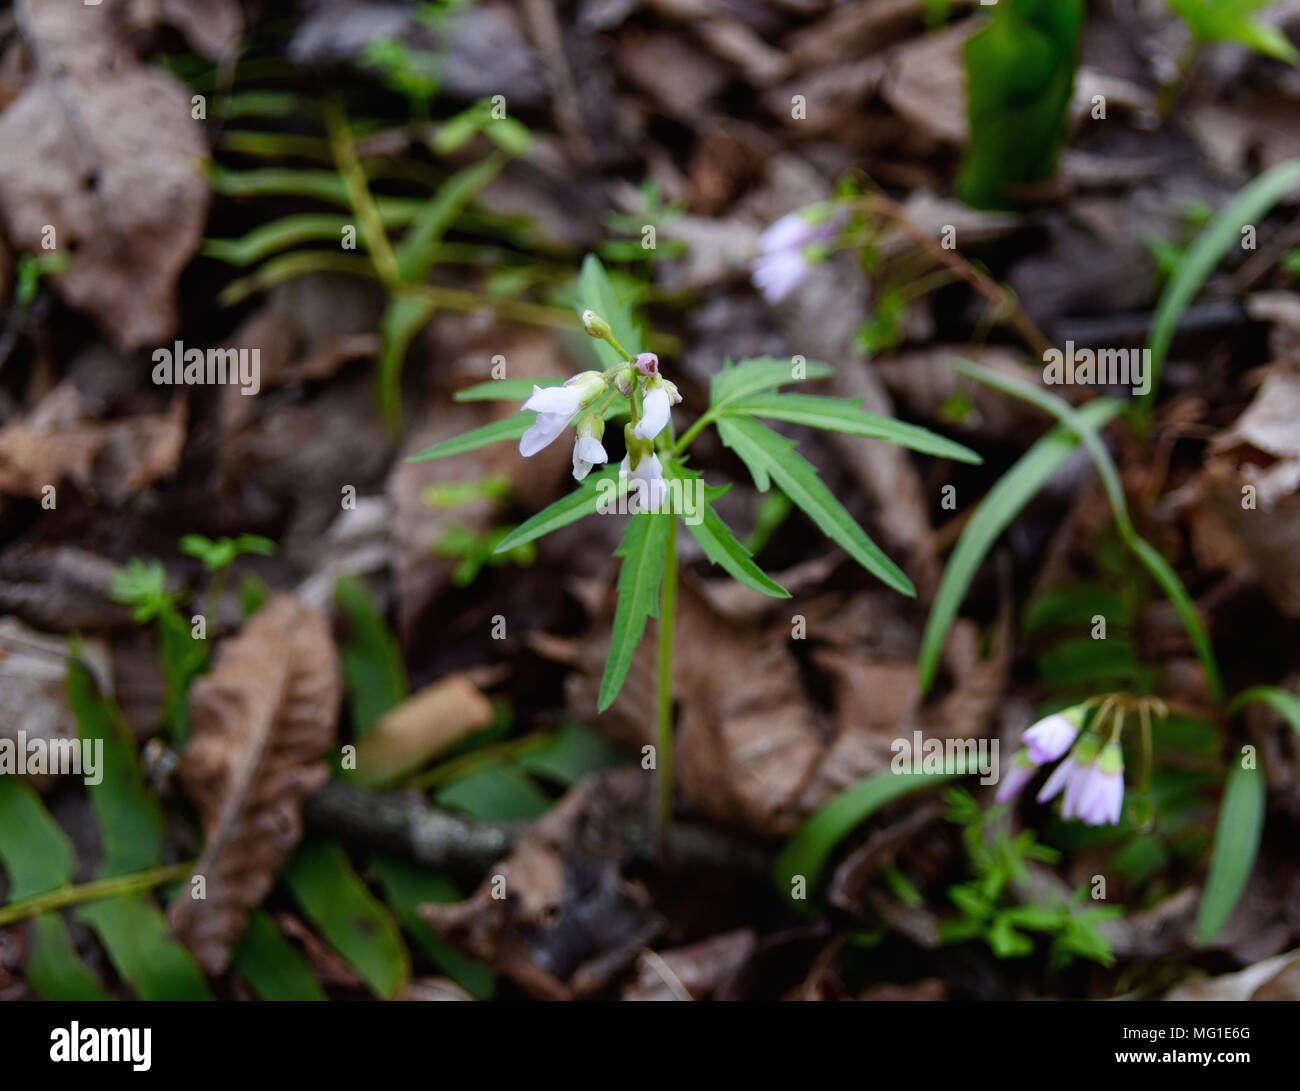 Dainty pink flowers and toothed leaves of cutleaf toothwort emerging in a spring forest. Stock Photo